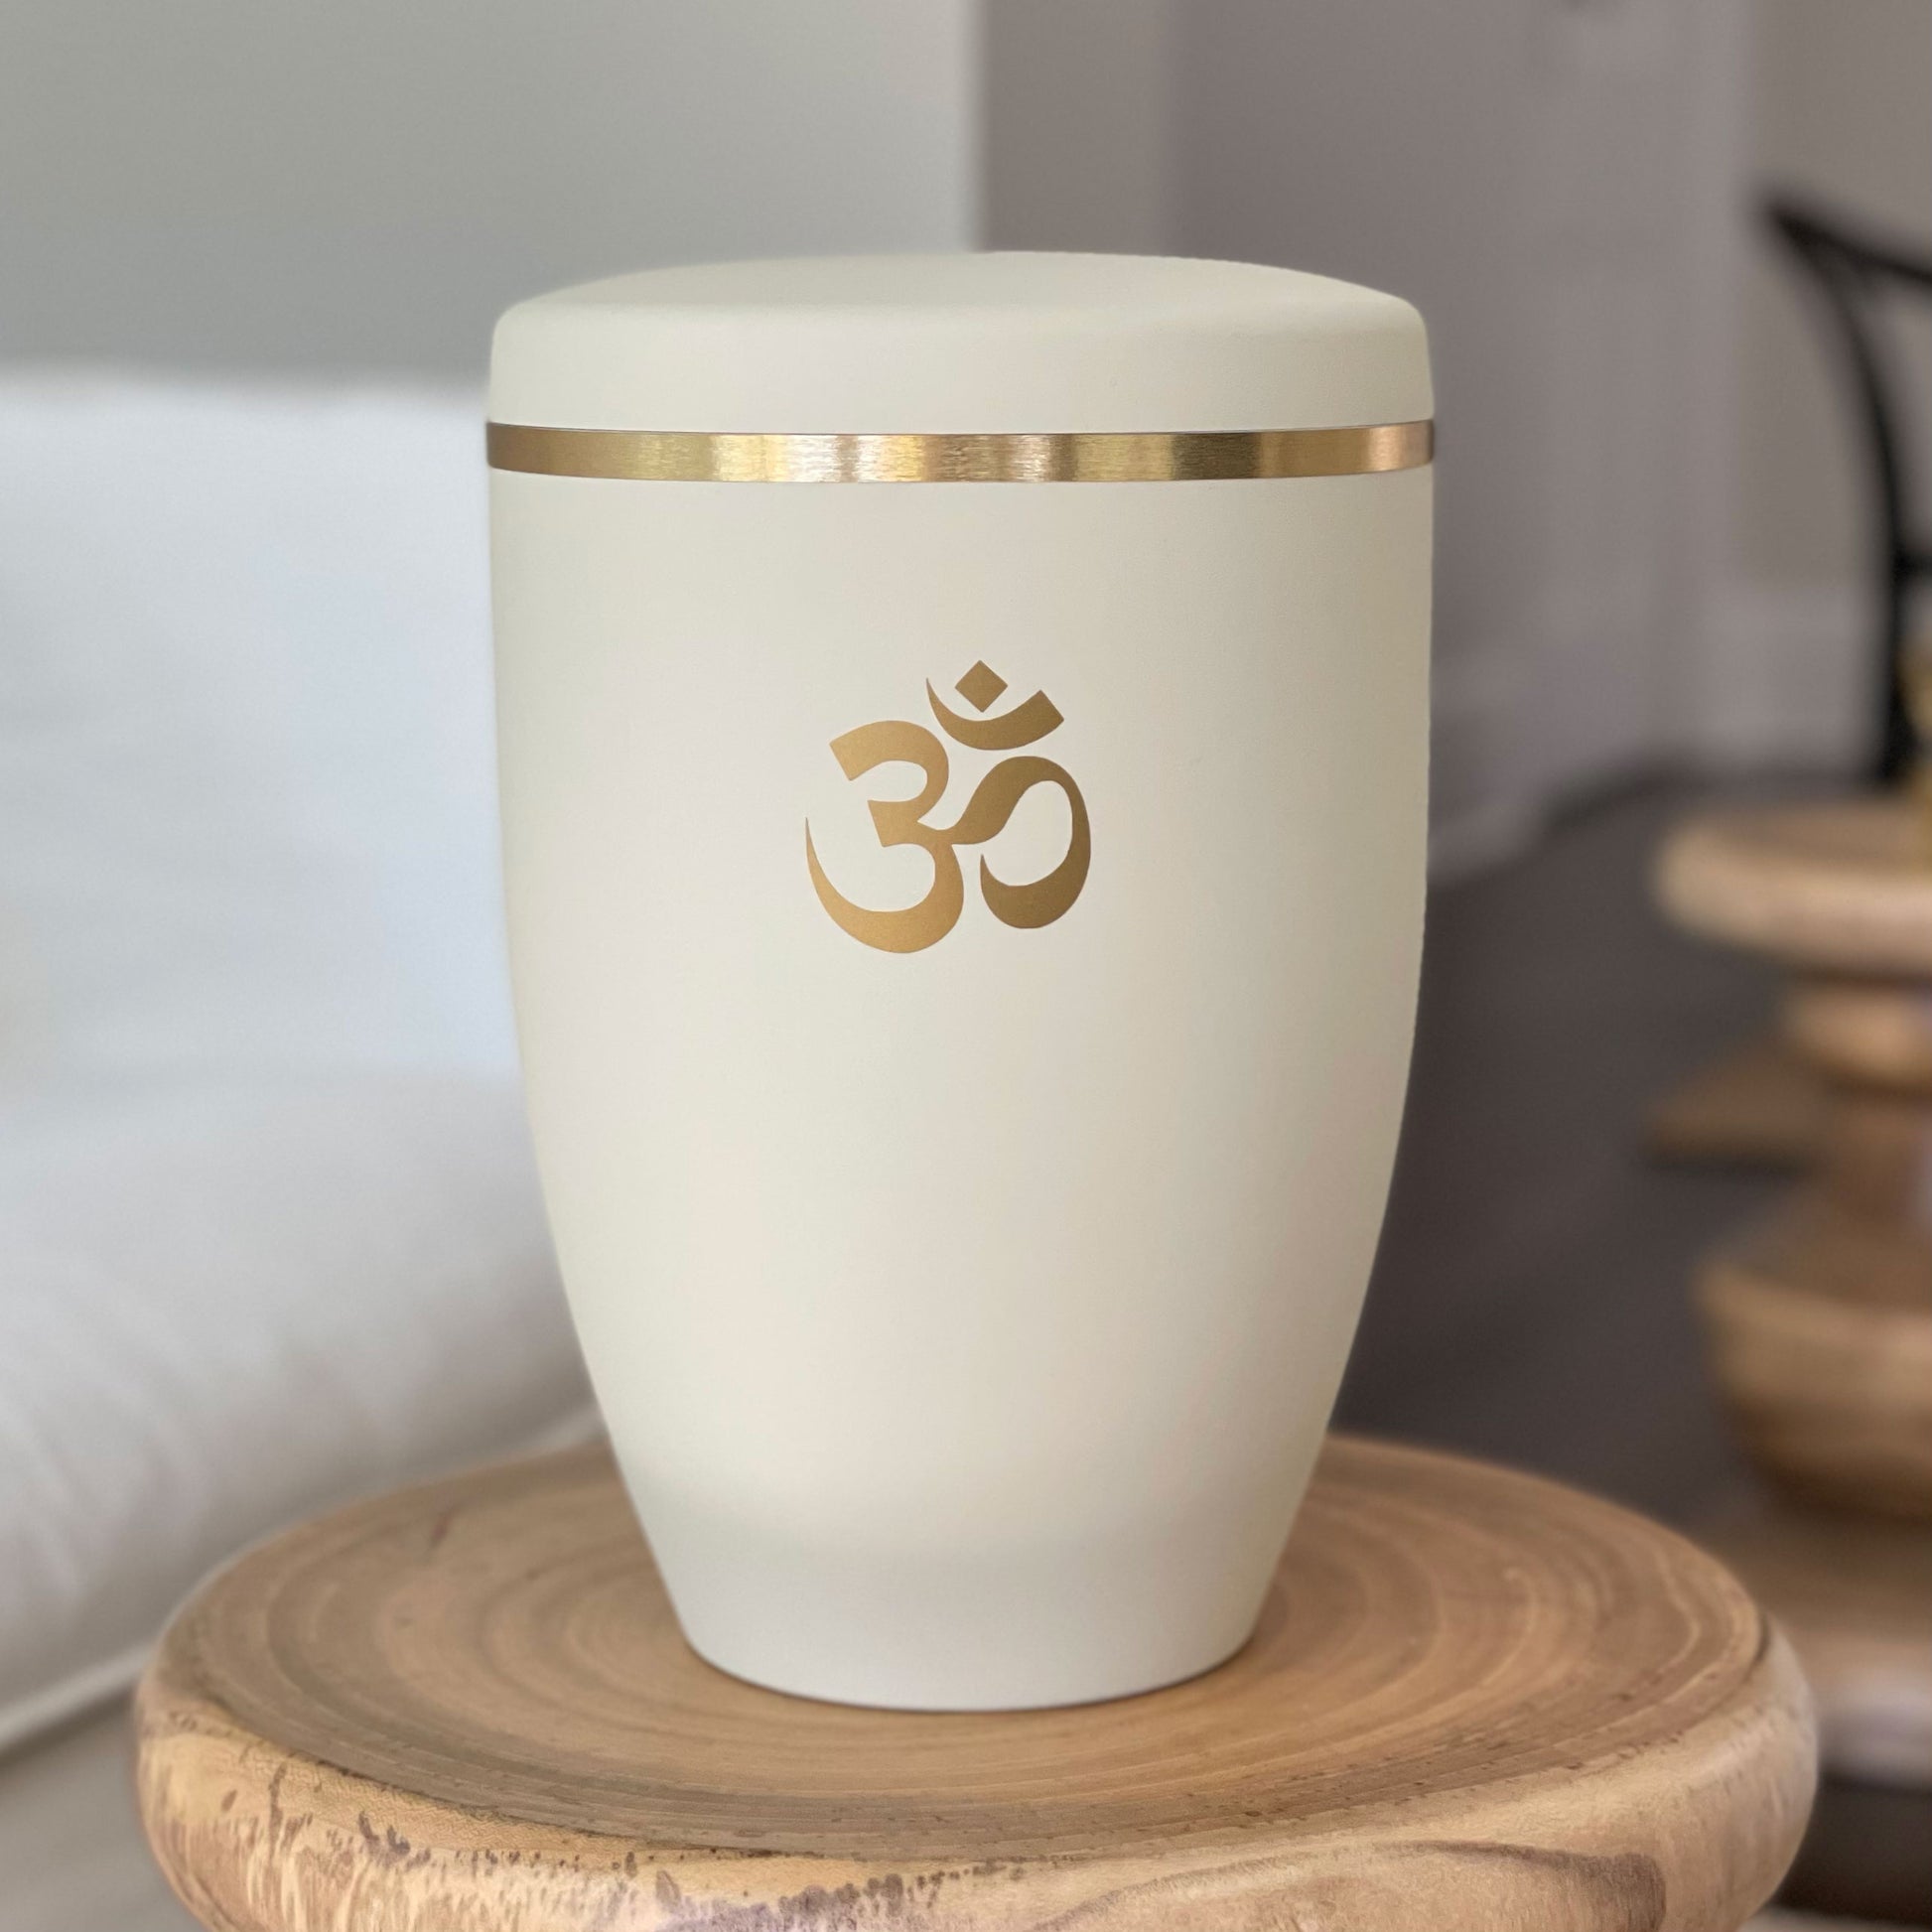 Beautiful ivory coloured funeral urn with a brushed gold band and golden om symbol sitting on a small wooden table with white furniture in the background.